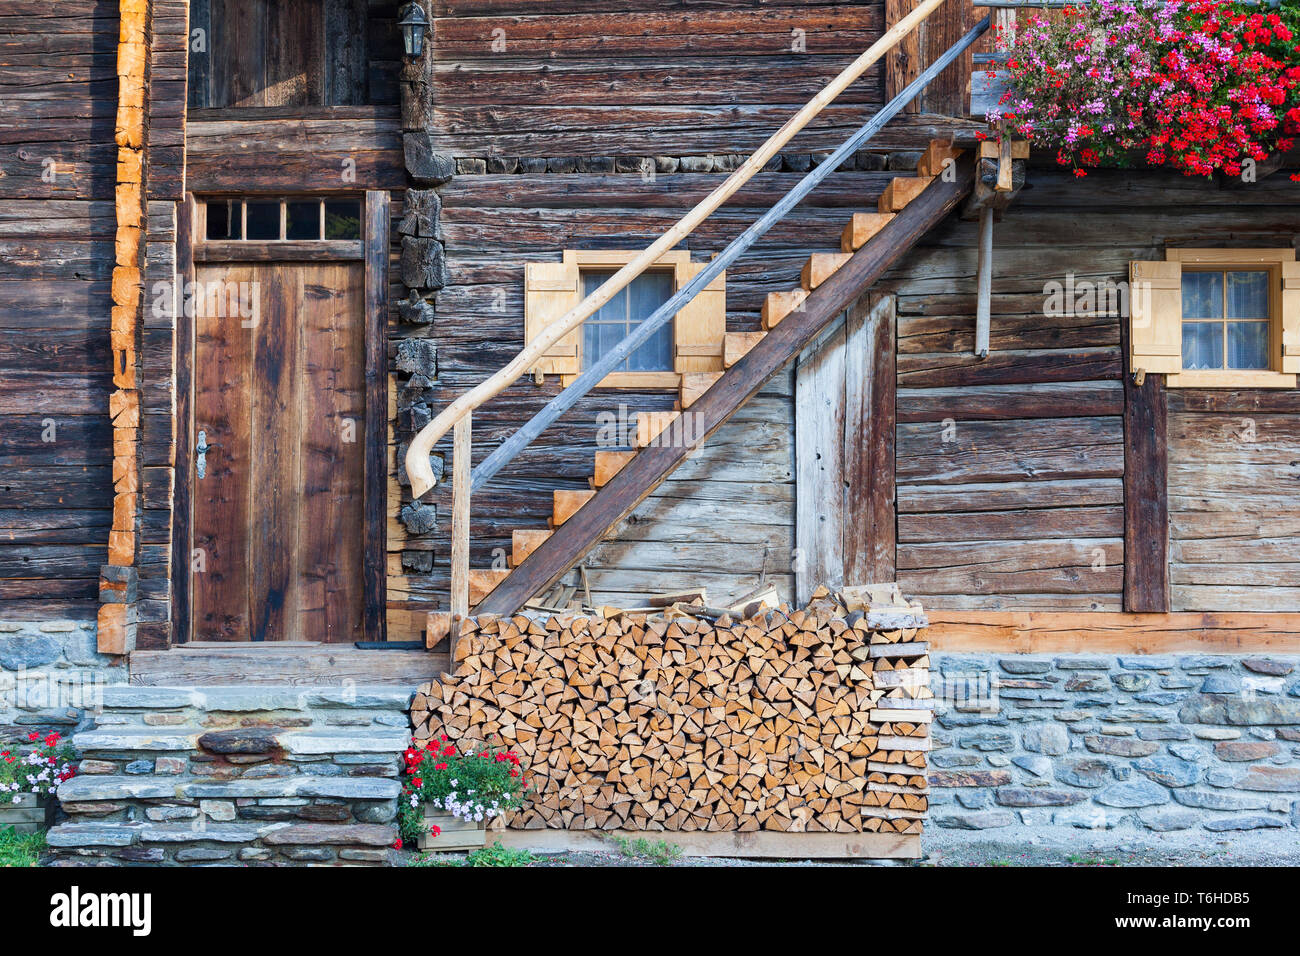 Old Alphus with flowers and a firewood pile Stock Photo